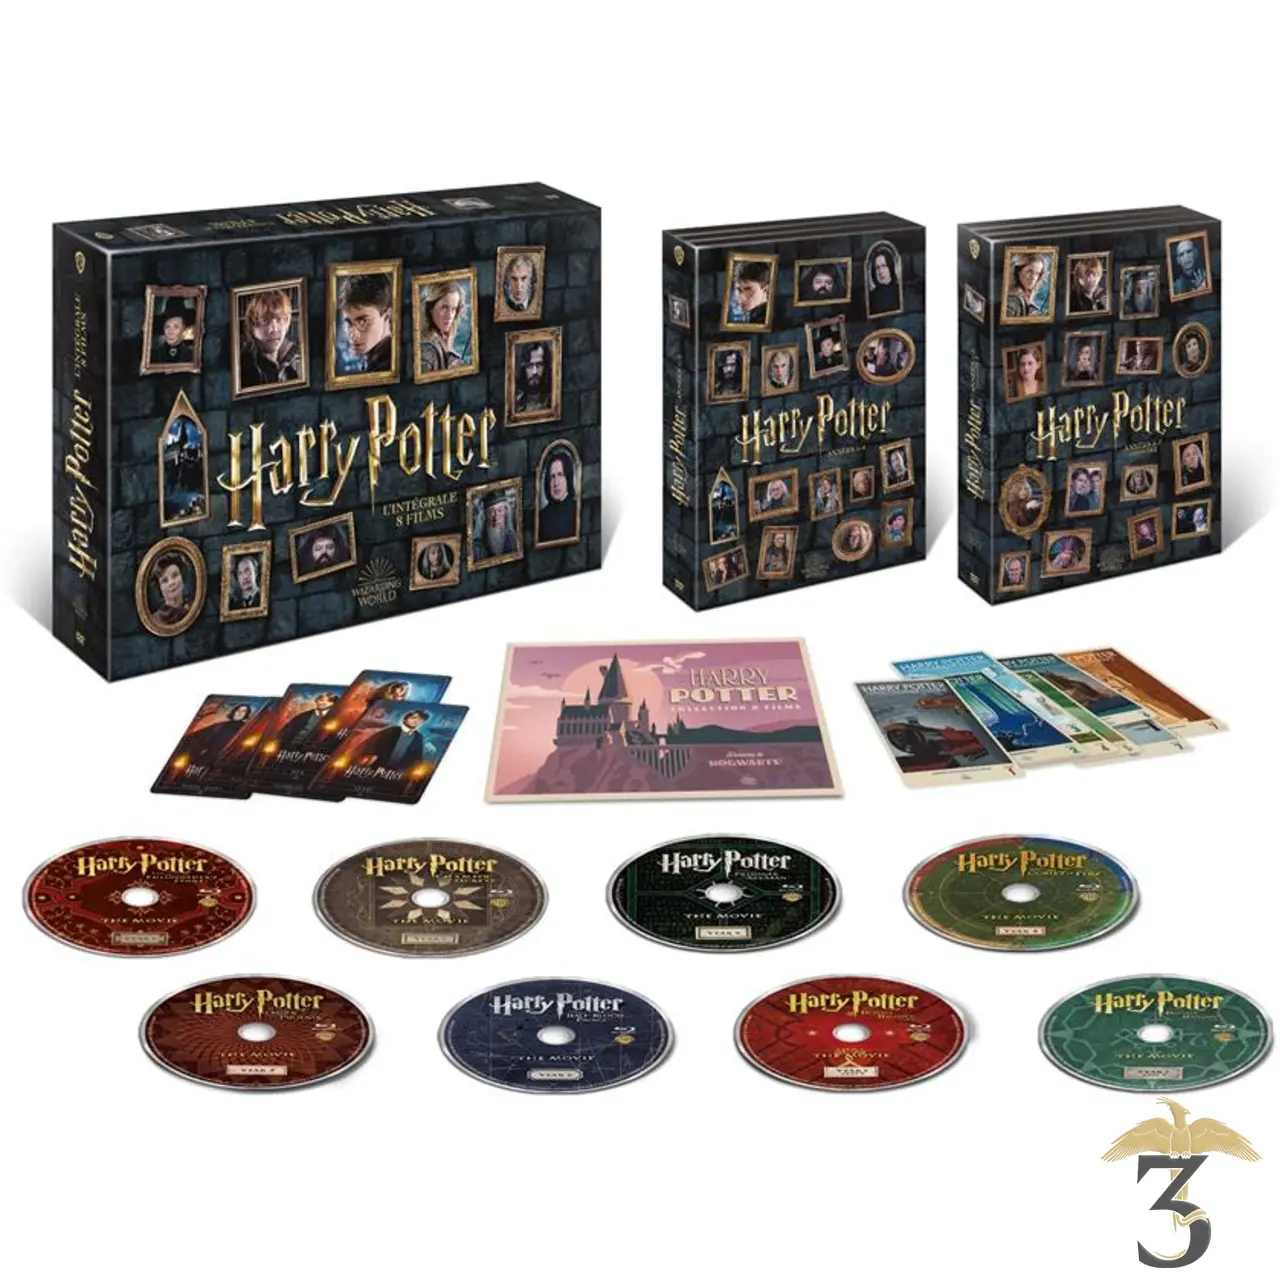 DIVERS - Harry Potter: The Complete 8-Film Collection - Jeunesse